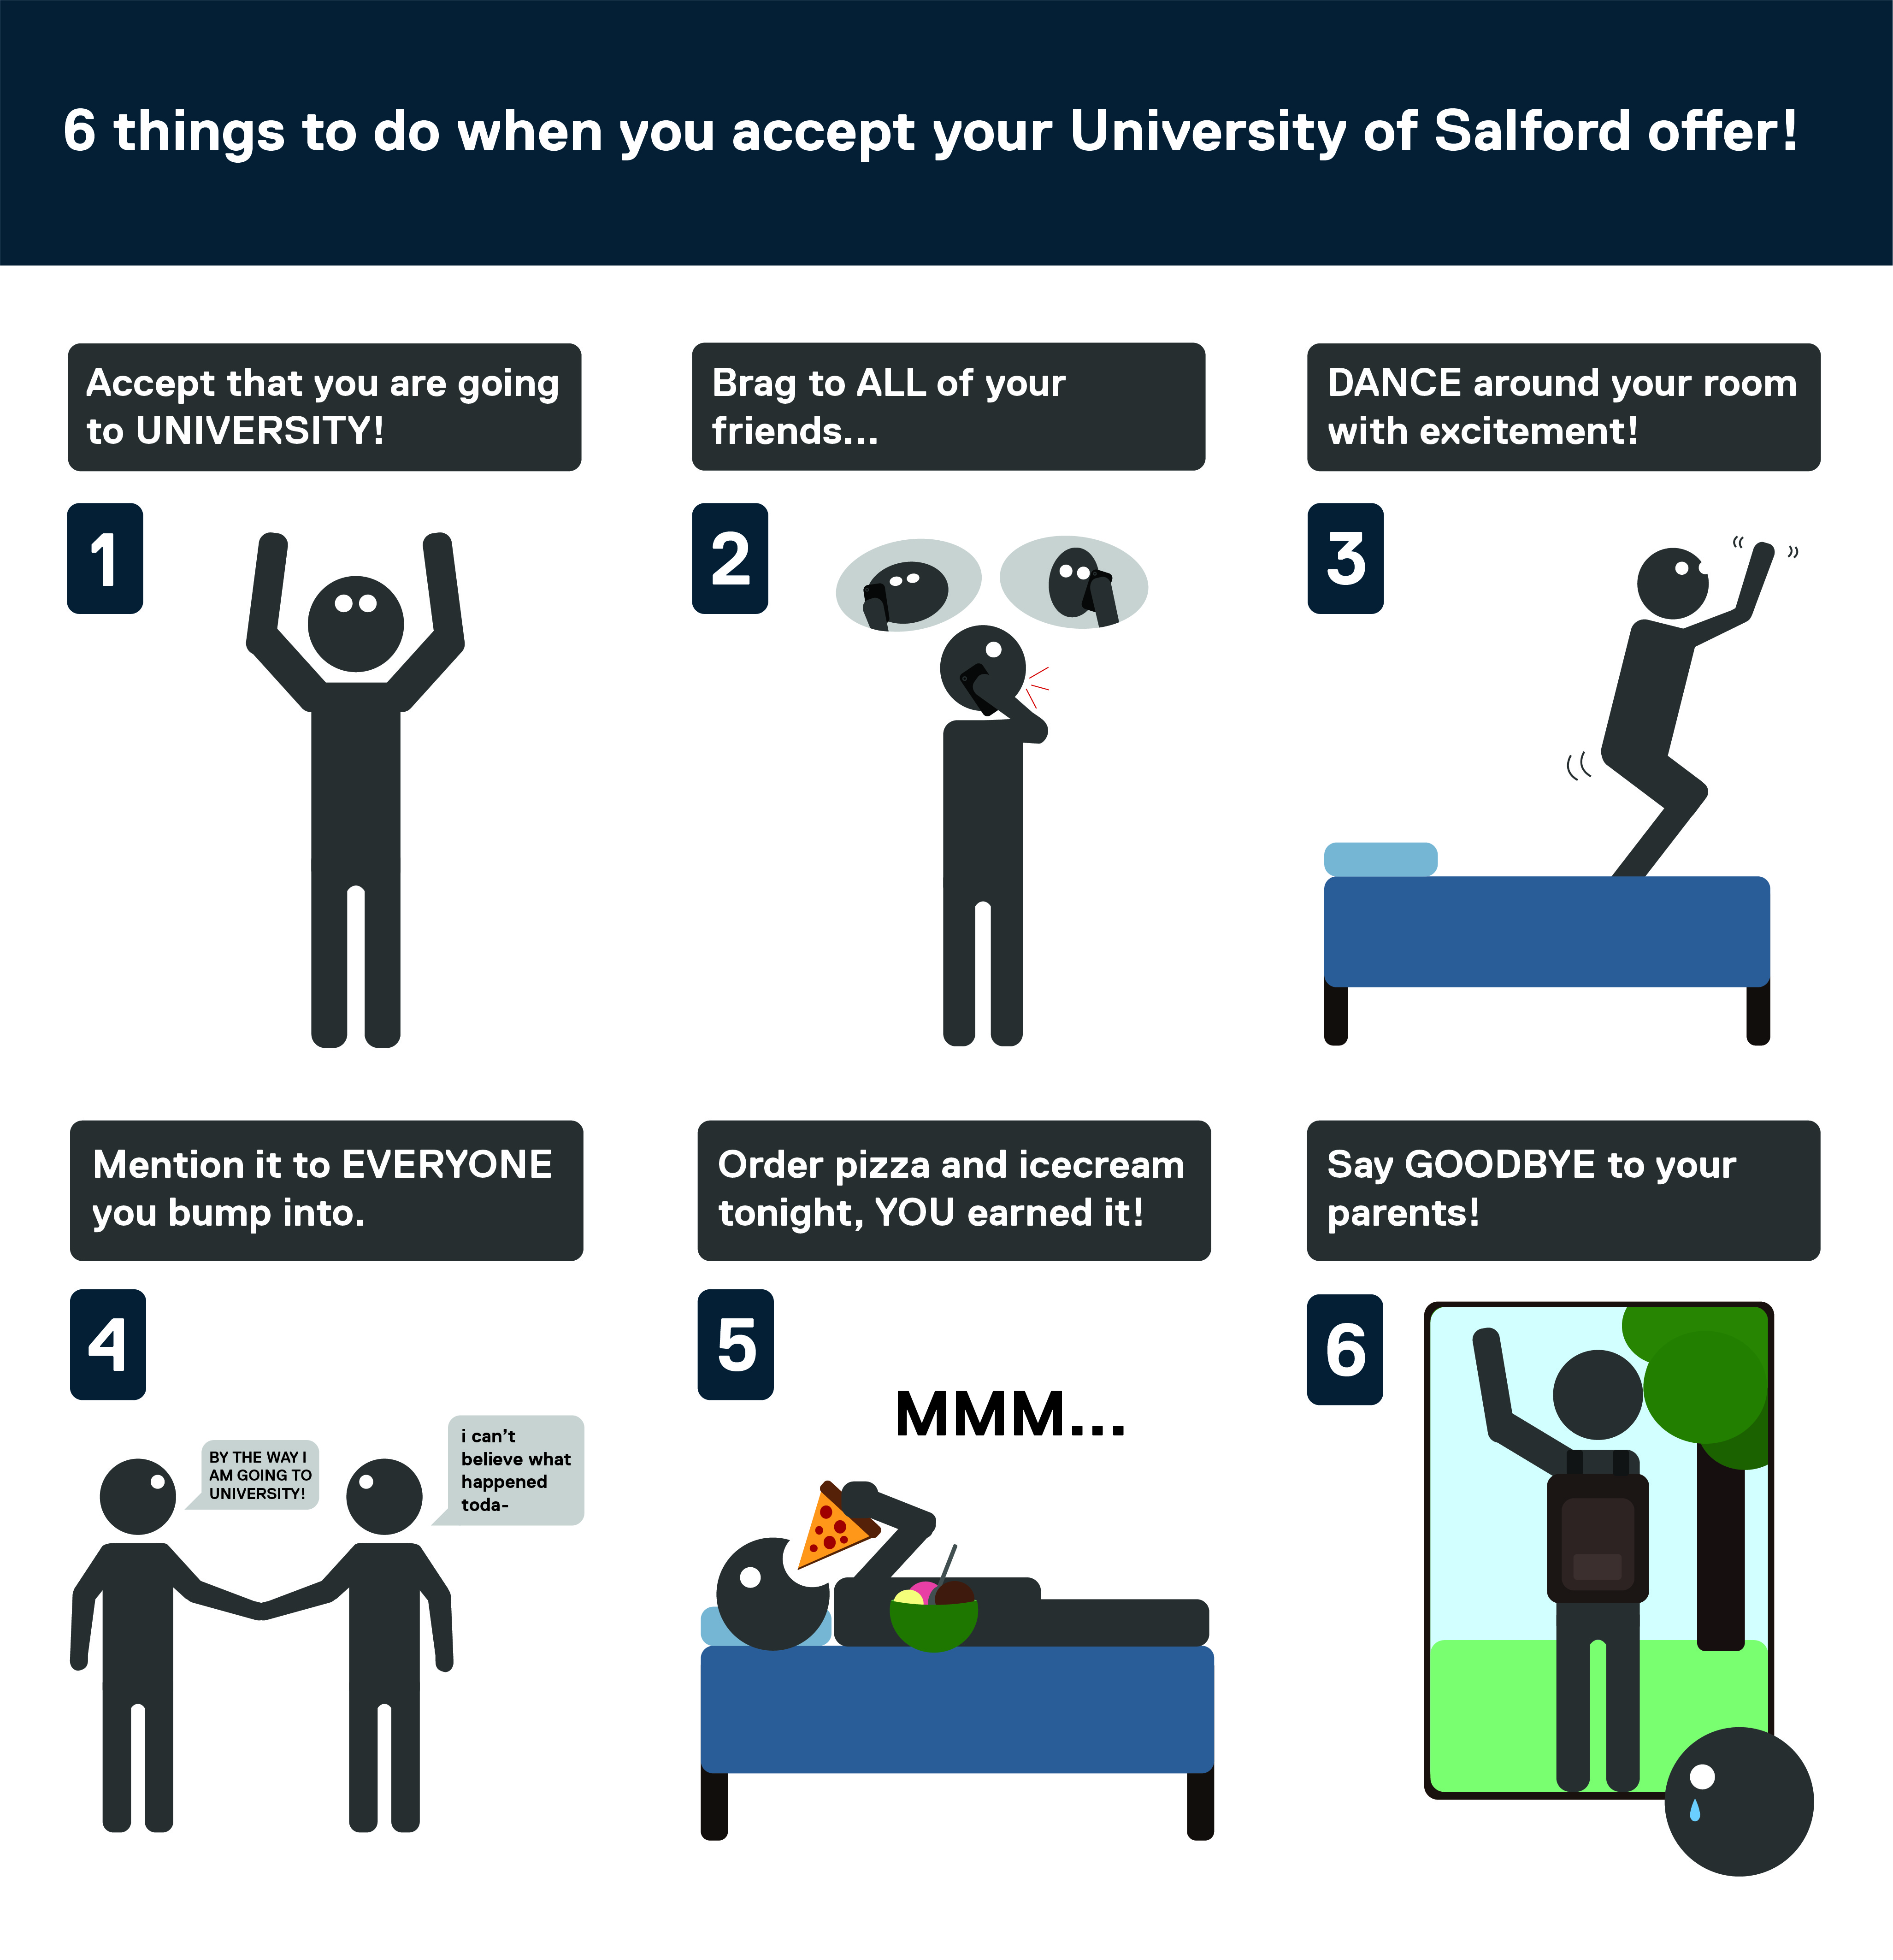 image: 6 things to do when you accept your university offer